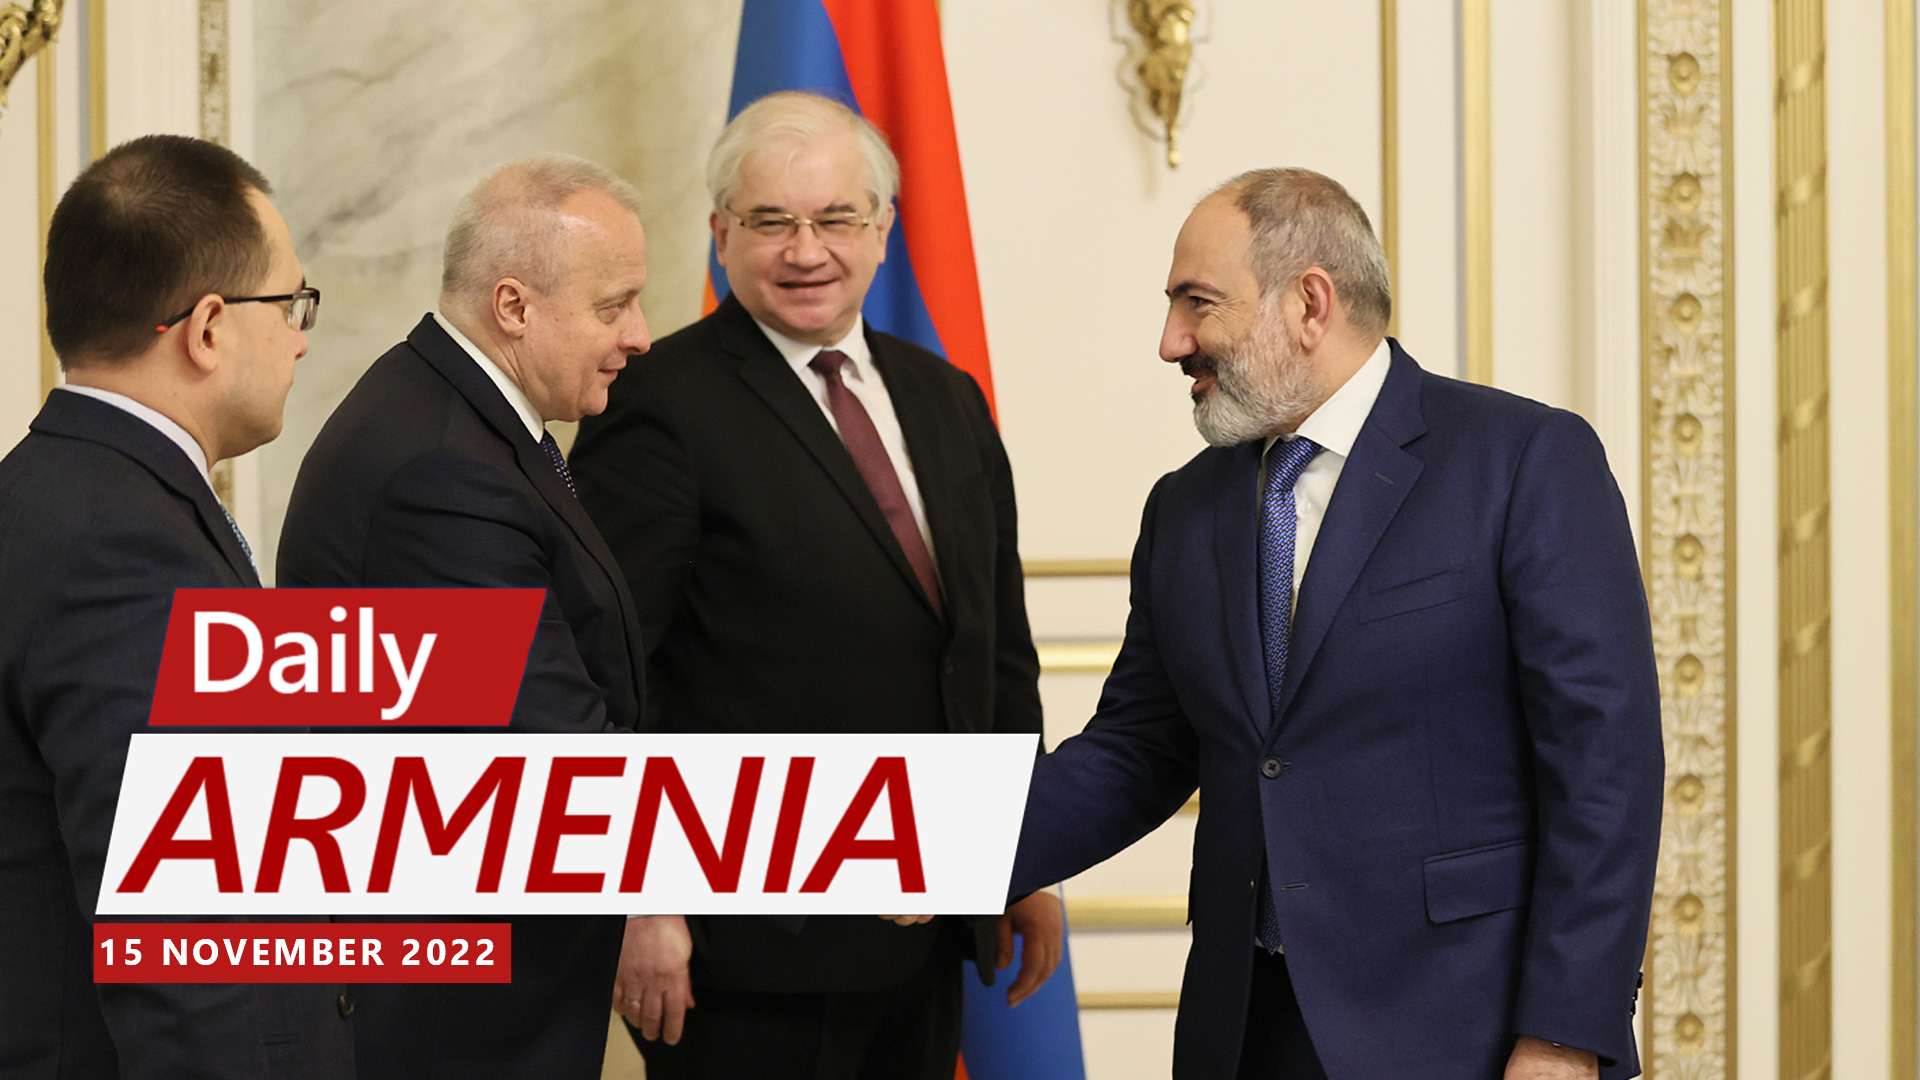 Armenia in favor of Russian peace proposals, Pashinyan tells Russian envoy